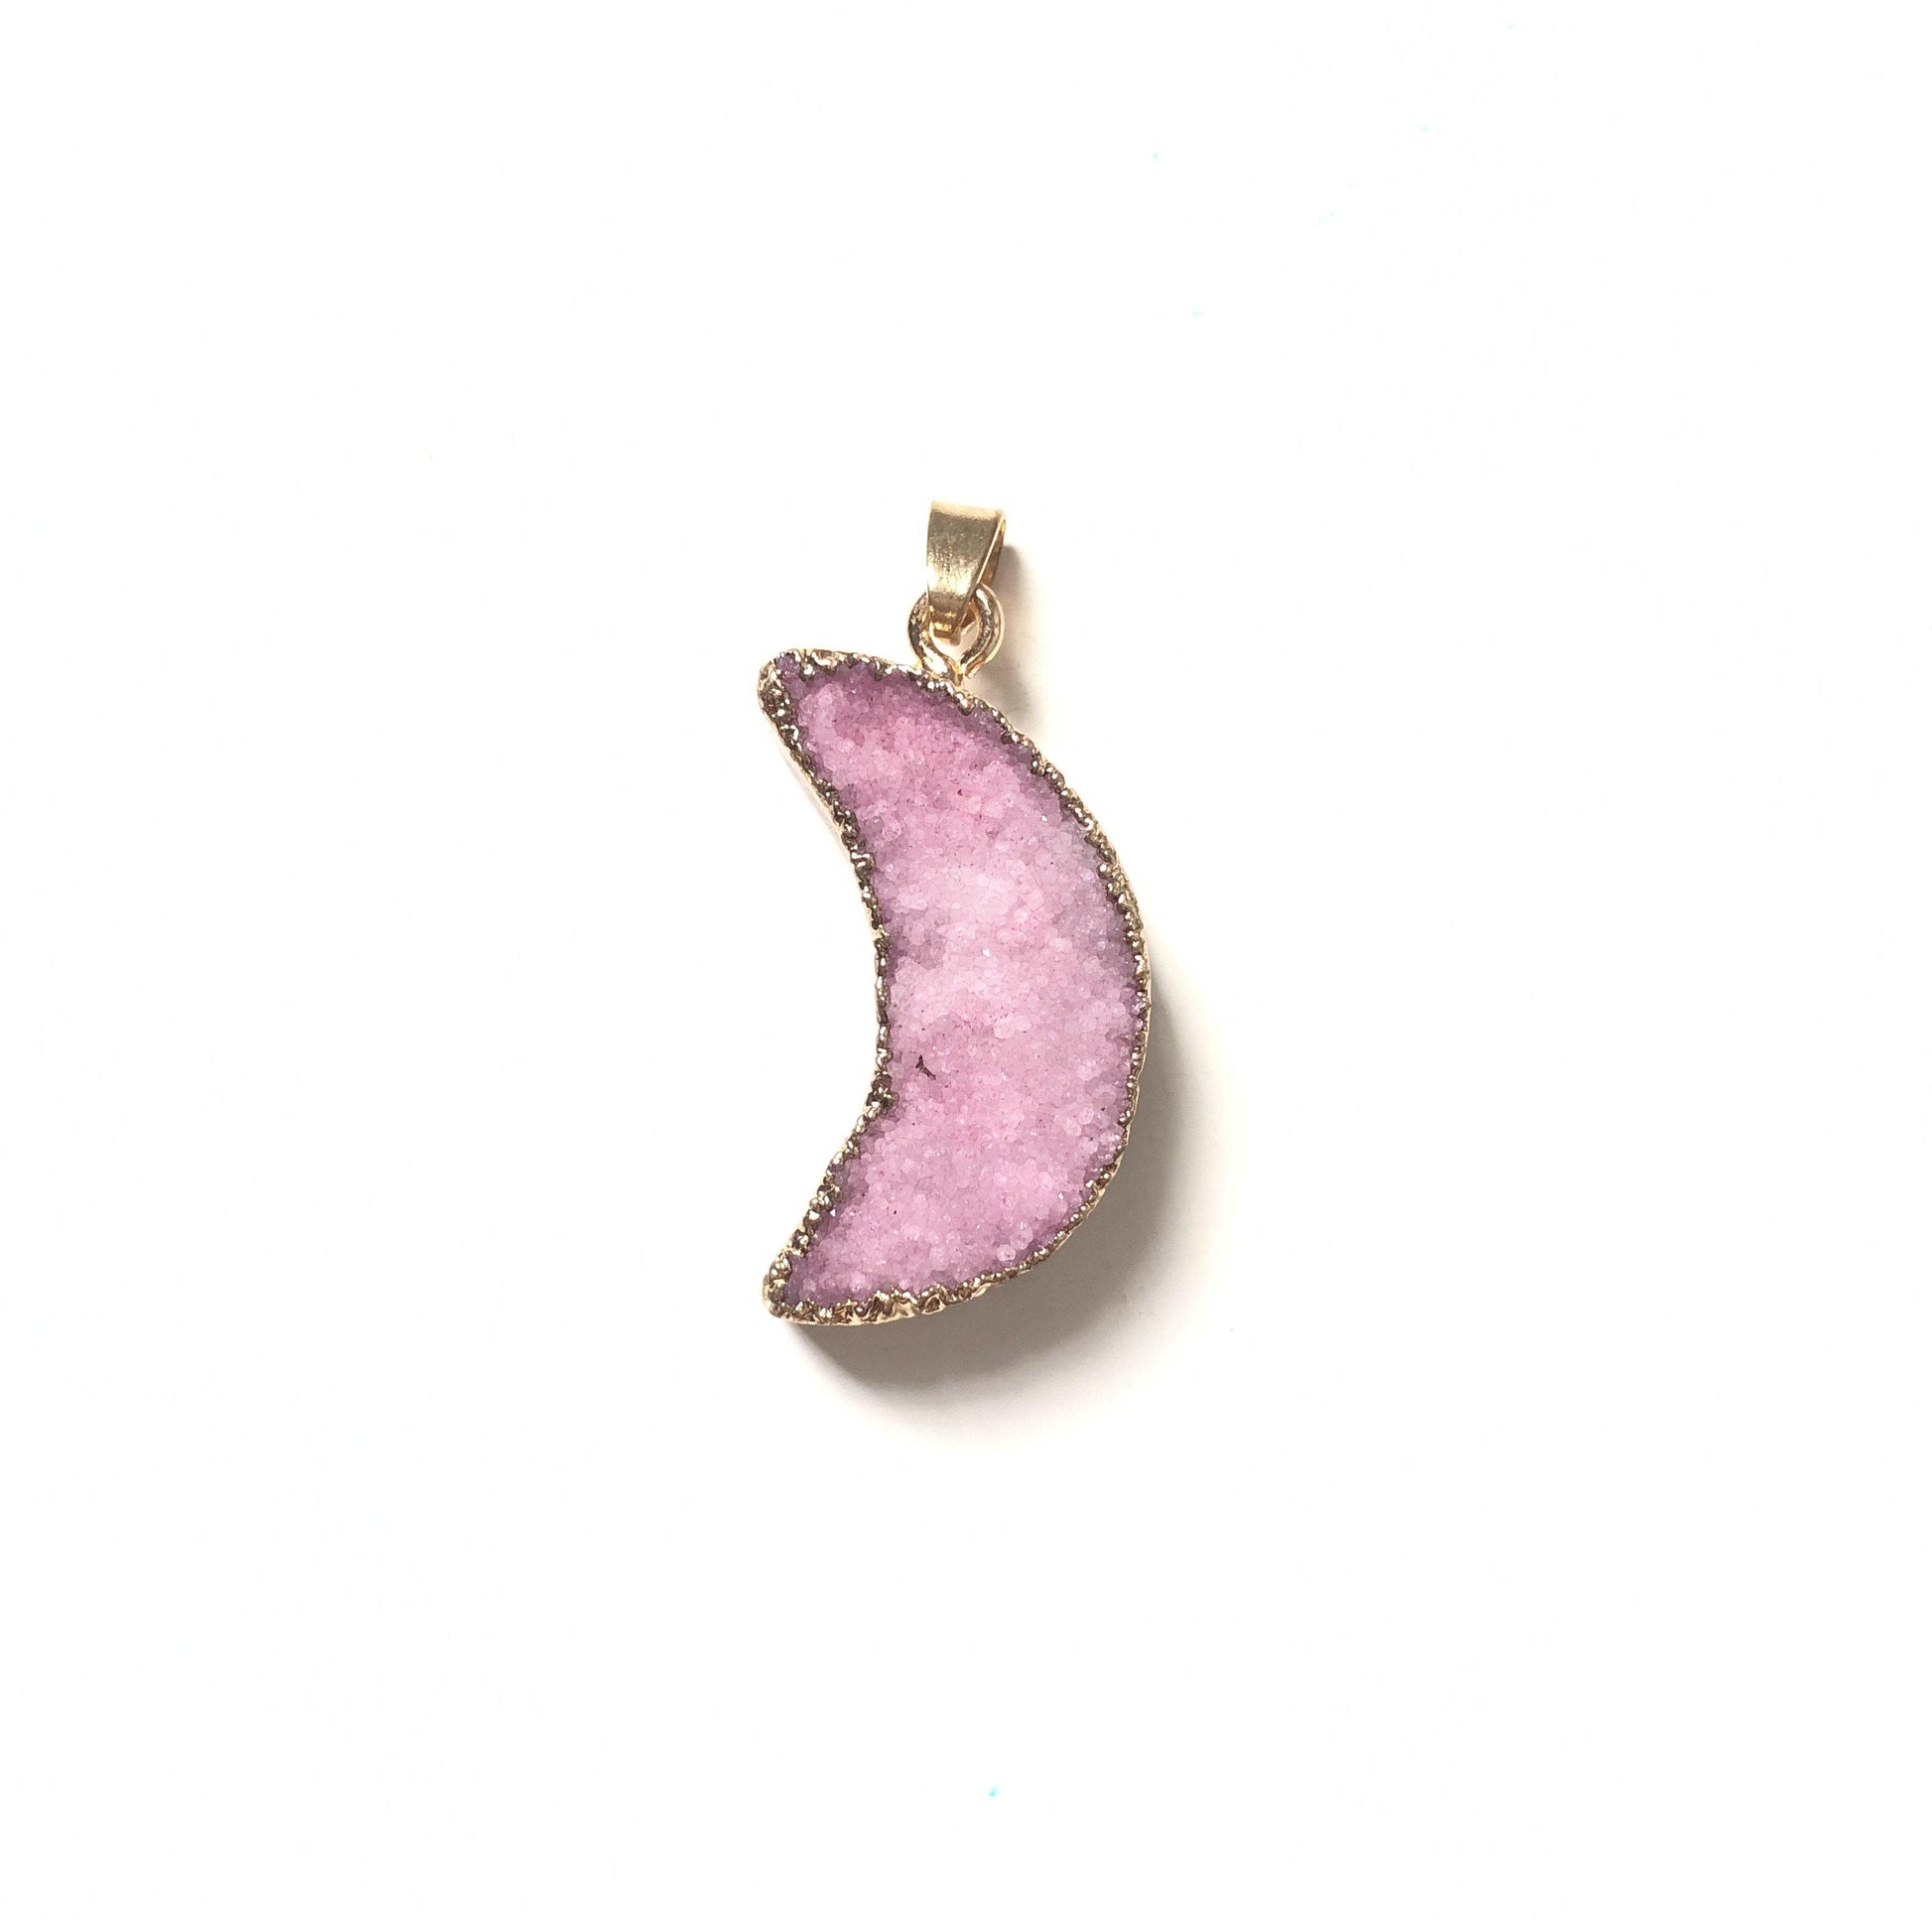 5pcs/lot 34*15mm Moon Shape Natural Agate Druzy Charm Pink on Gold Stone Charms Charms Beads Beyond